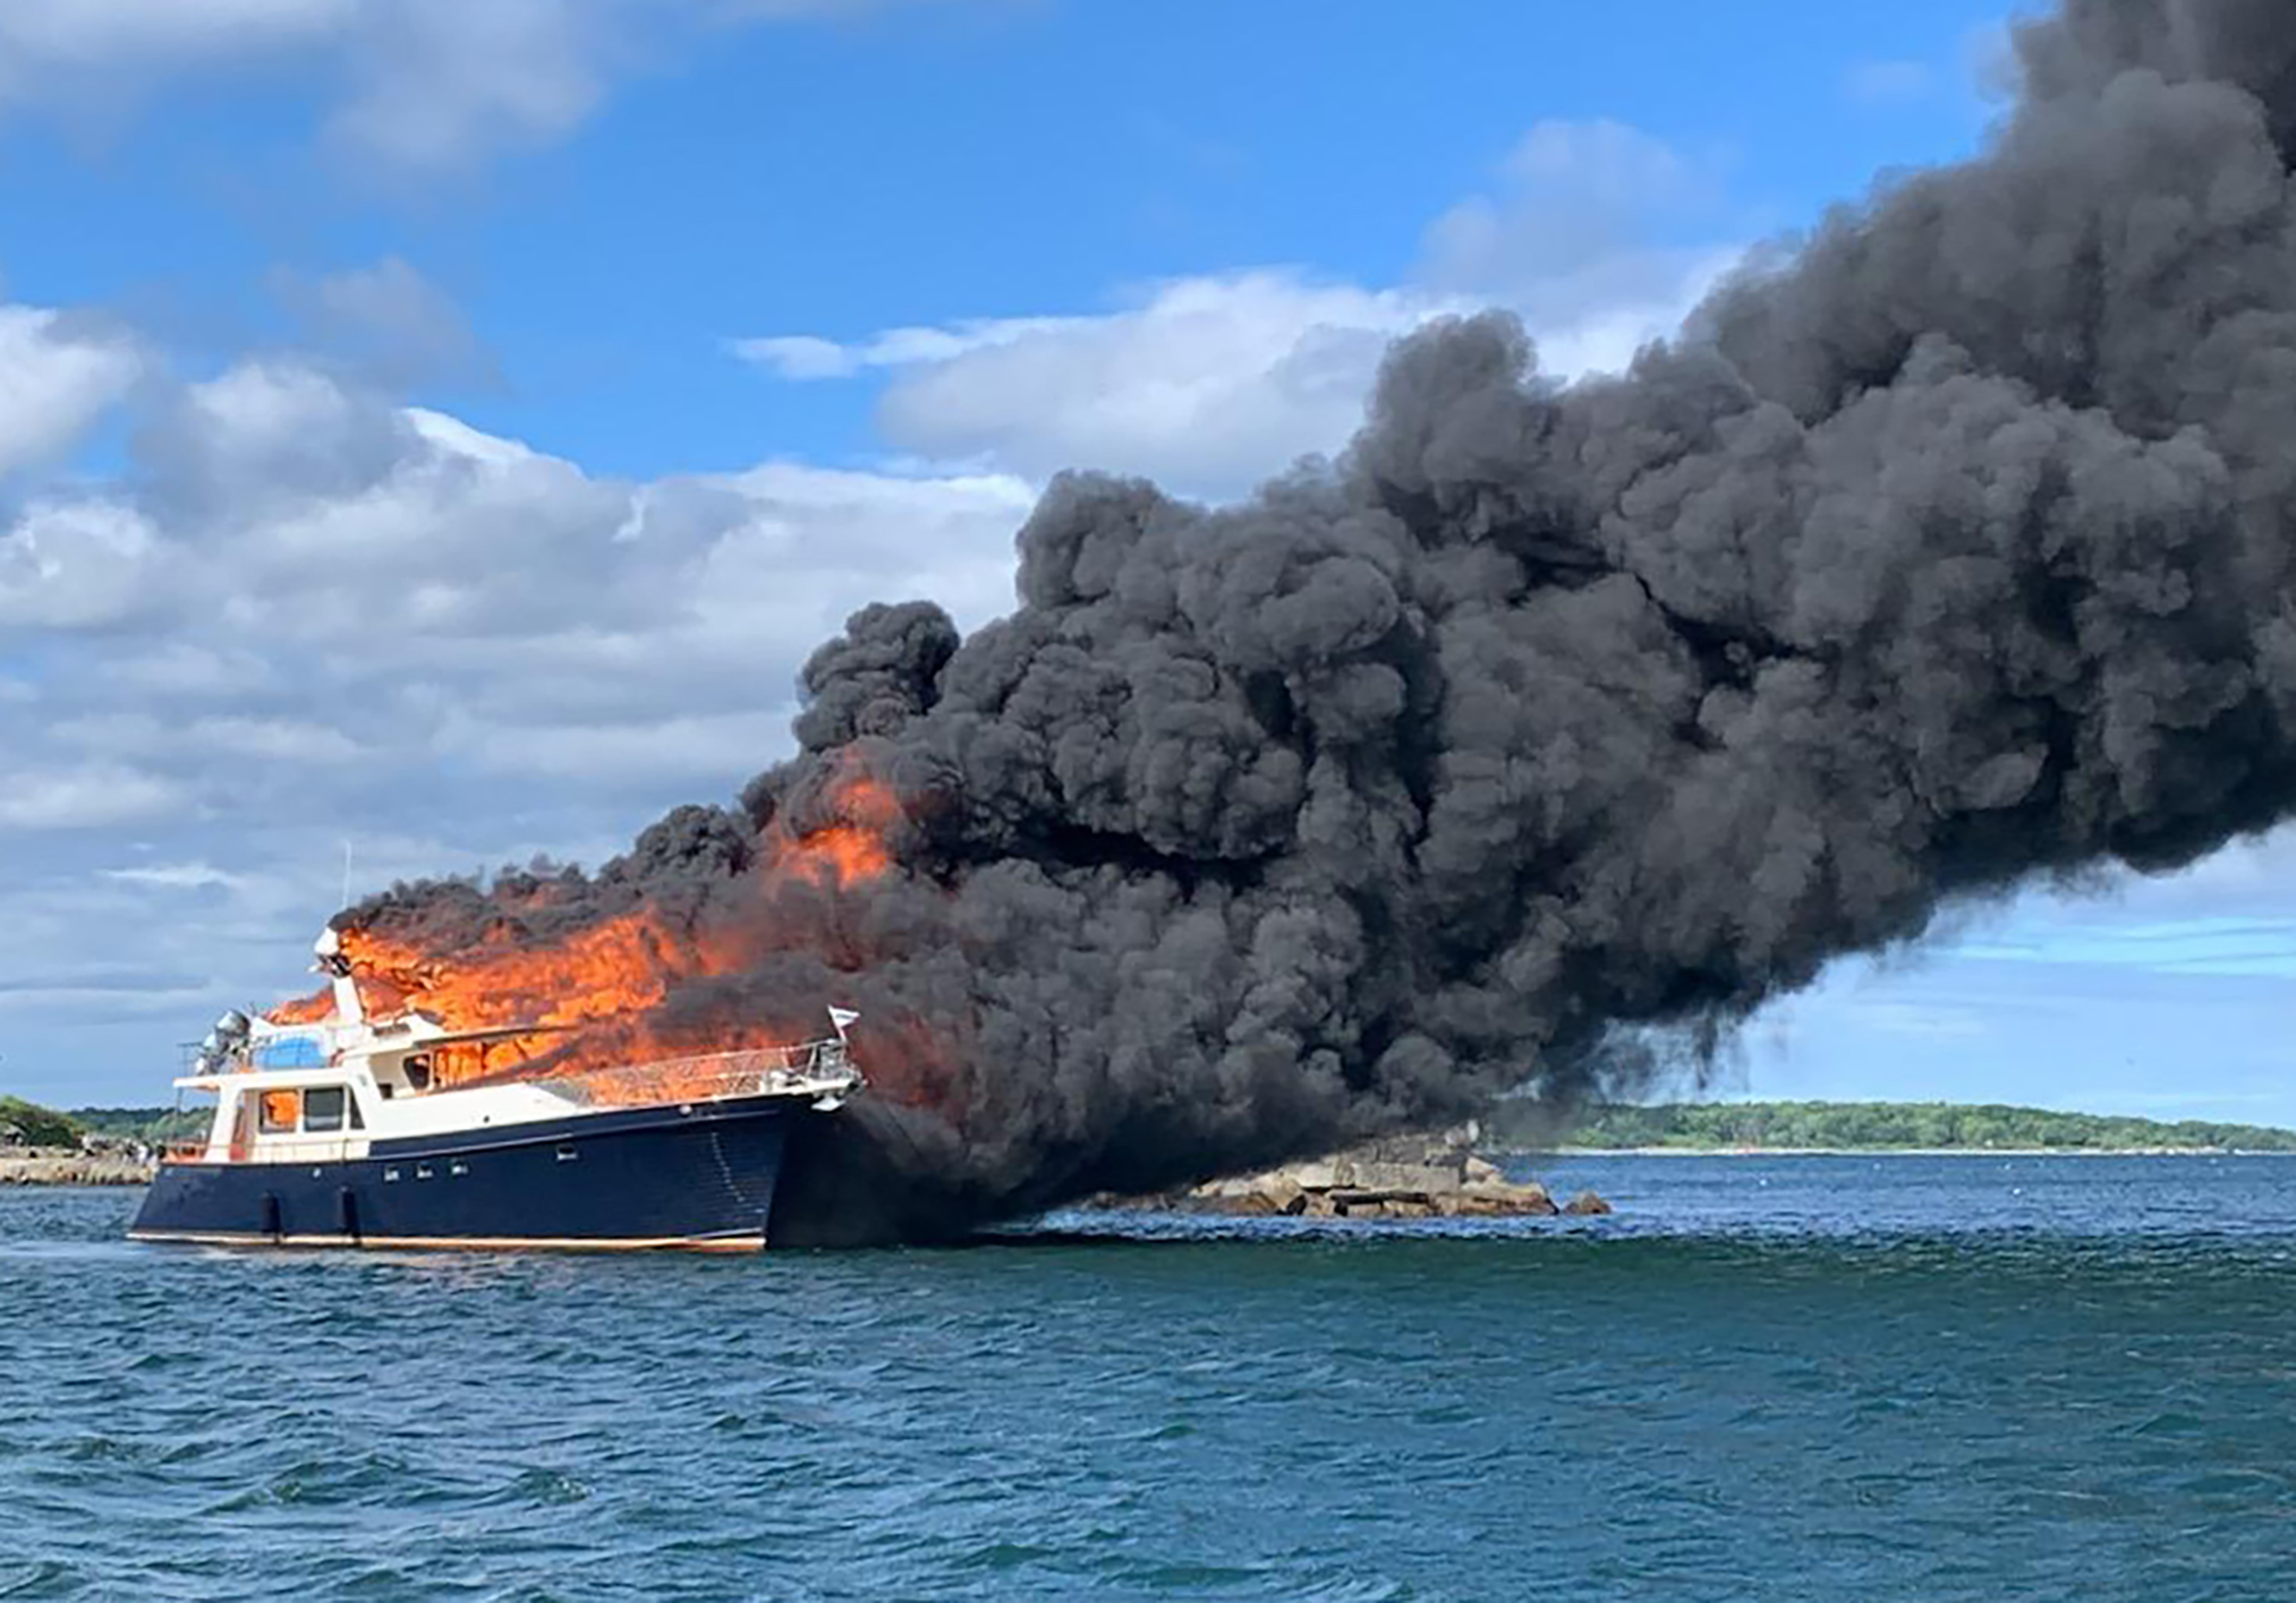 This image provided by New Hampshire State Police shows a yacht burning on the Piscataqua River in New Castle, N.H., Saturday, June 18, 2022. (New Hampshire State Police via AP)